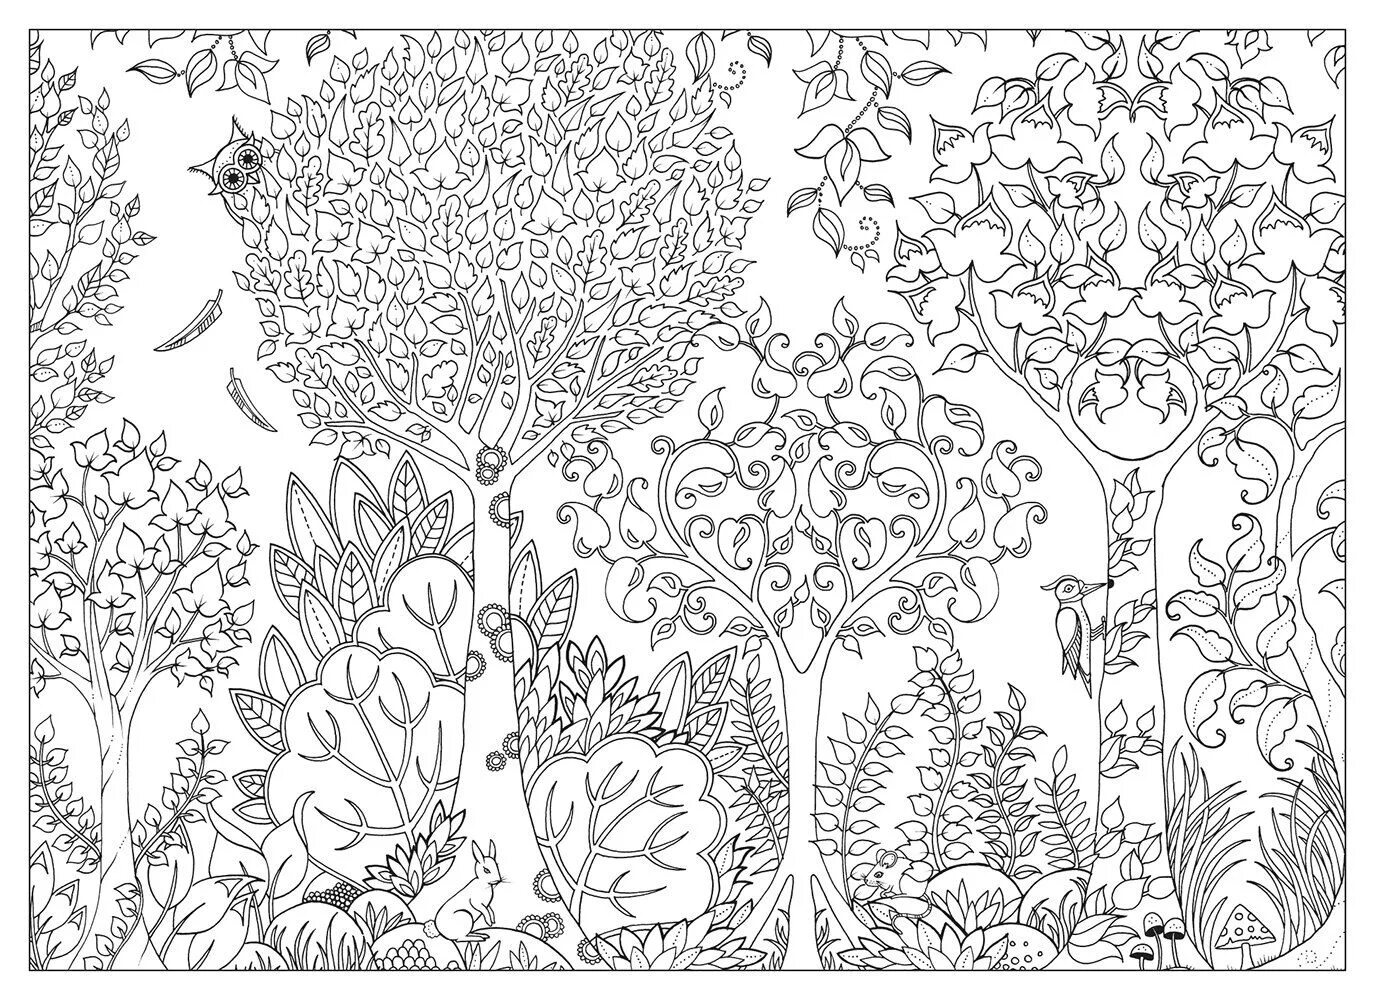 Blissful anti-stress forest coloring book